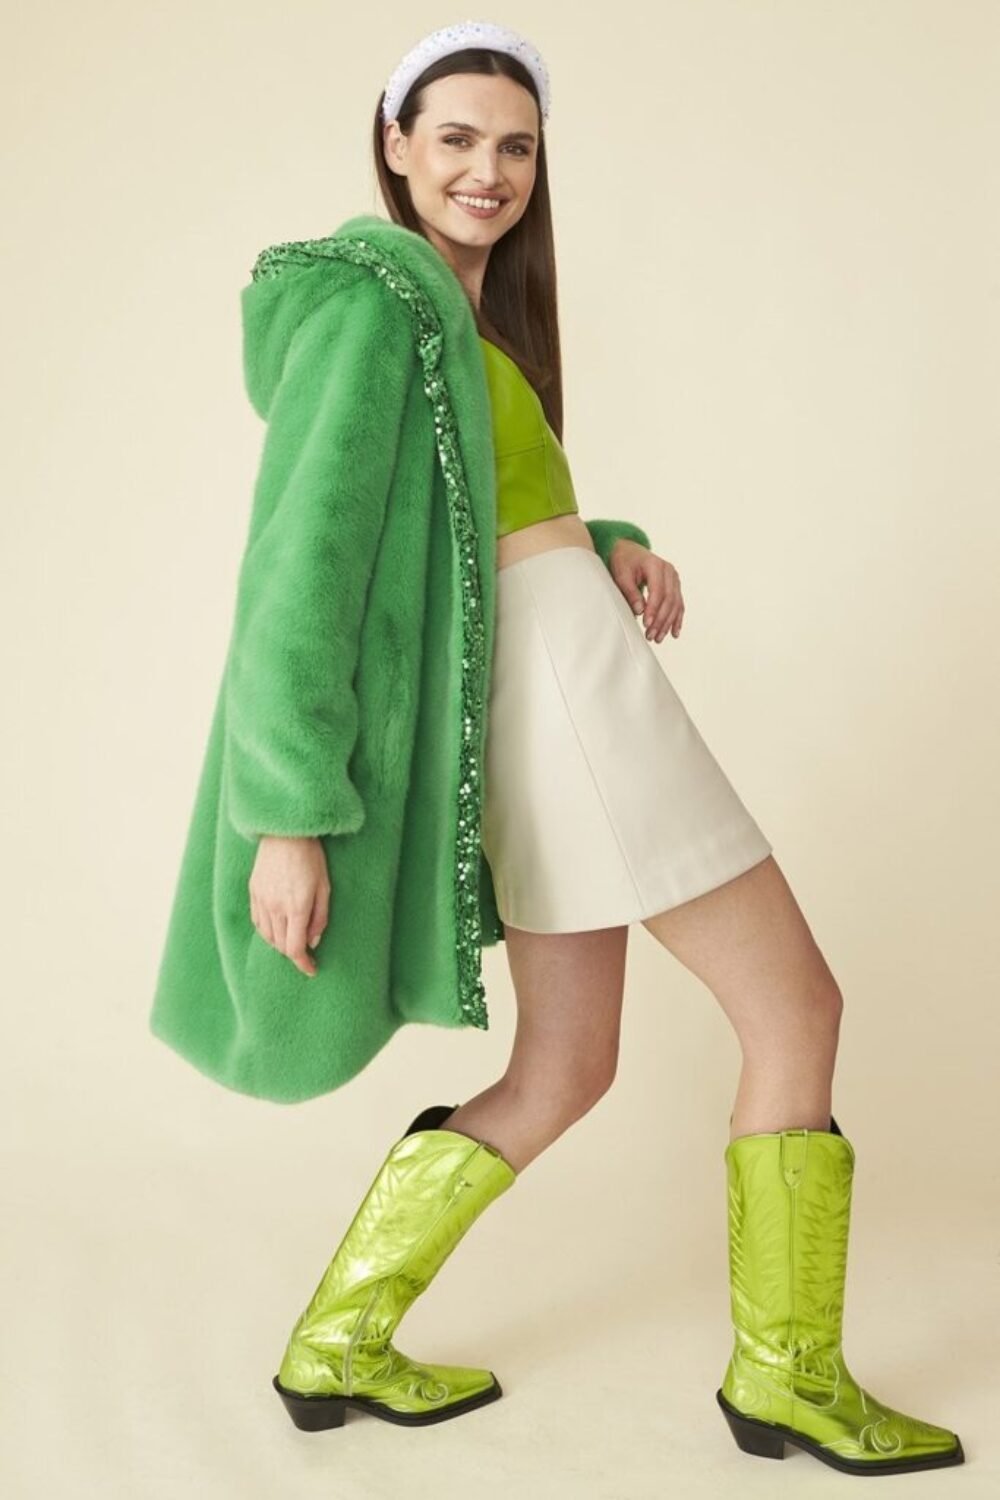 Shop Lux Green Oversized Faux Fur Coat with Sequin Detail and Hood and women's luxury and designer clothes at www.lux-apparel.co.uk